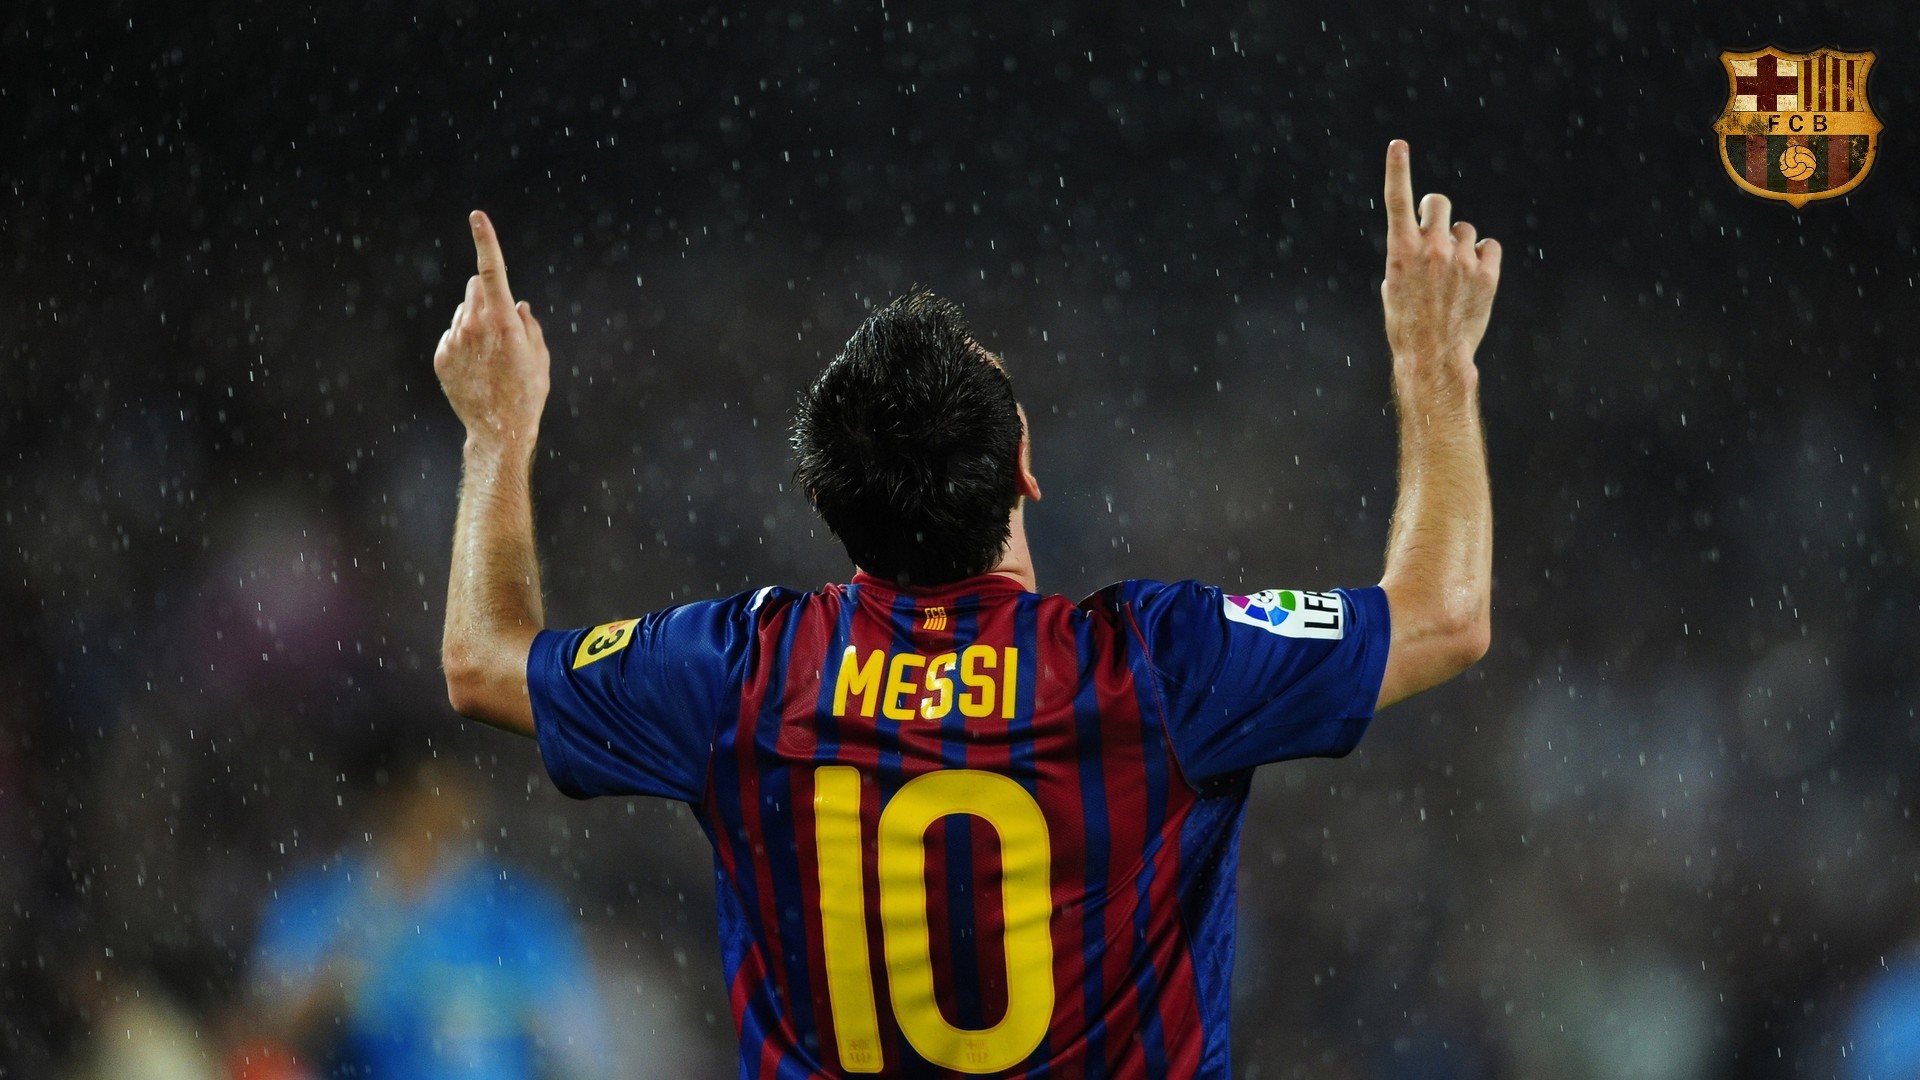 HD Lionel Messi Wallpapers With Resolution 1920X1080 pixel. You can make this wallpaper for your Mac or Windows Desktop Background, iPhone, Android or Tablet and another Smartphone device for free